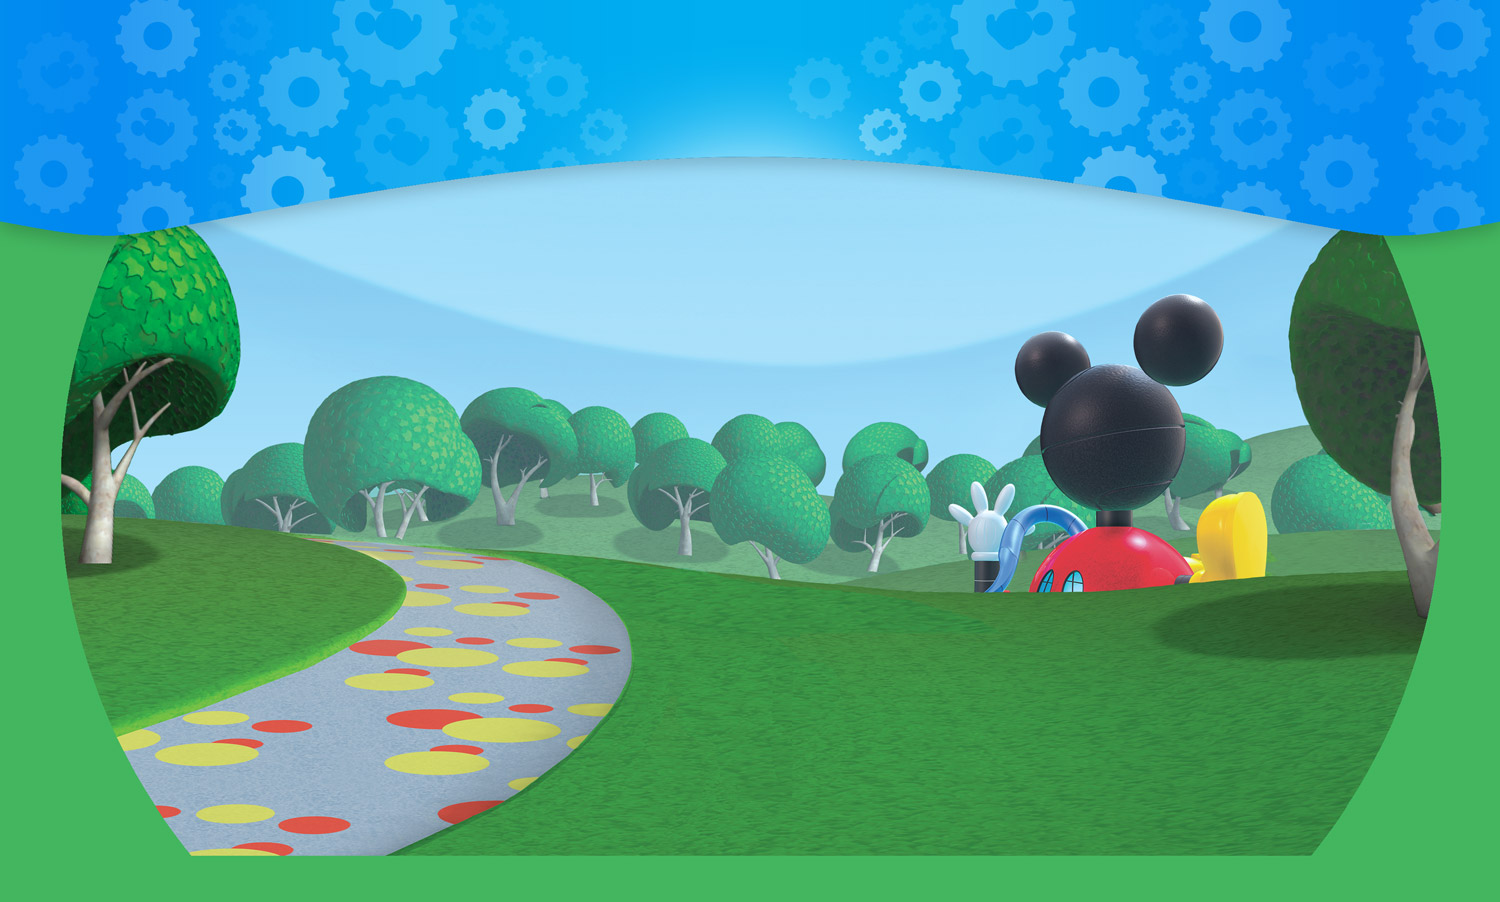 Mickey Mouse Clubhouse House Wallpaper